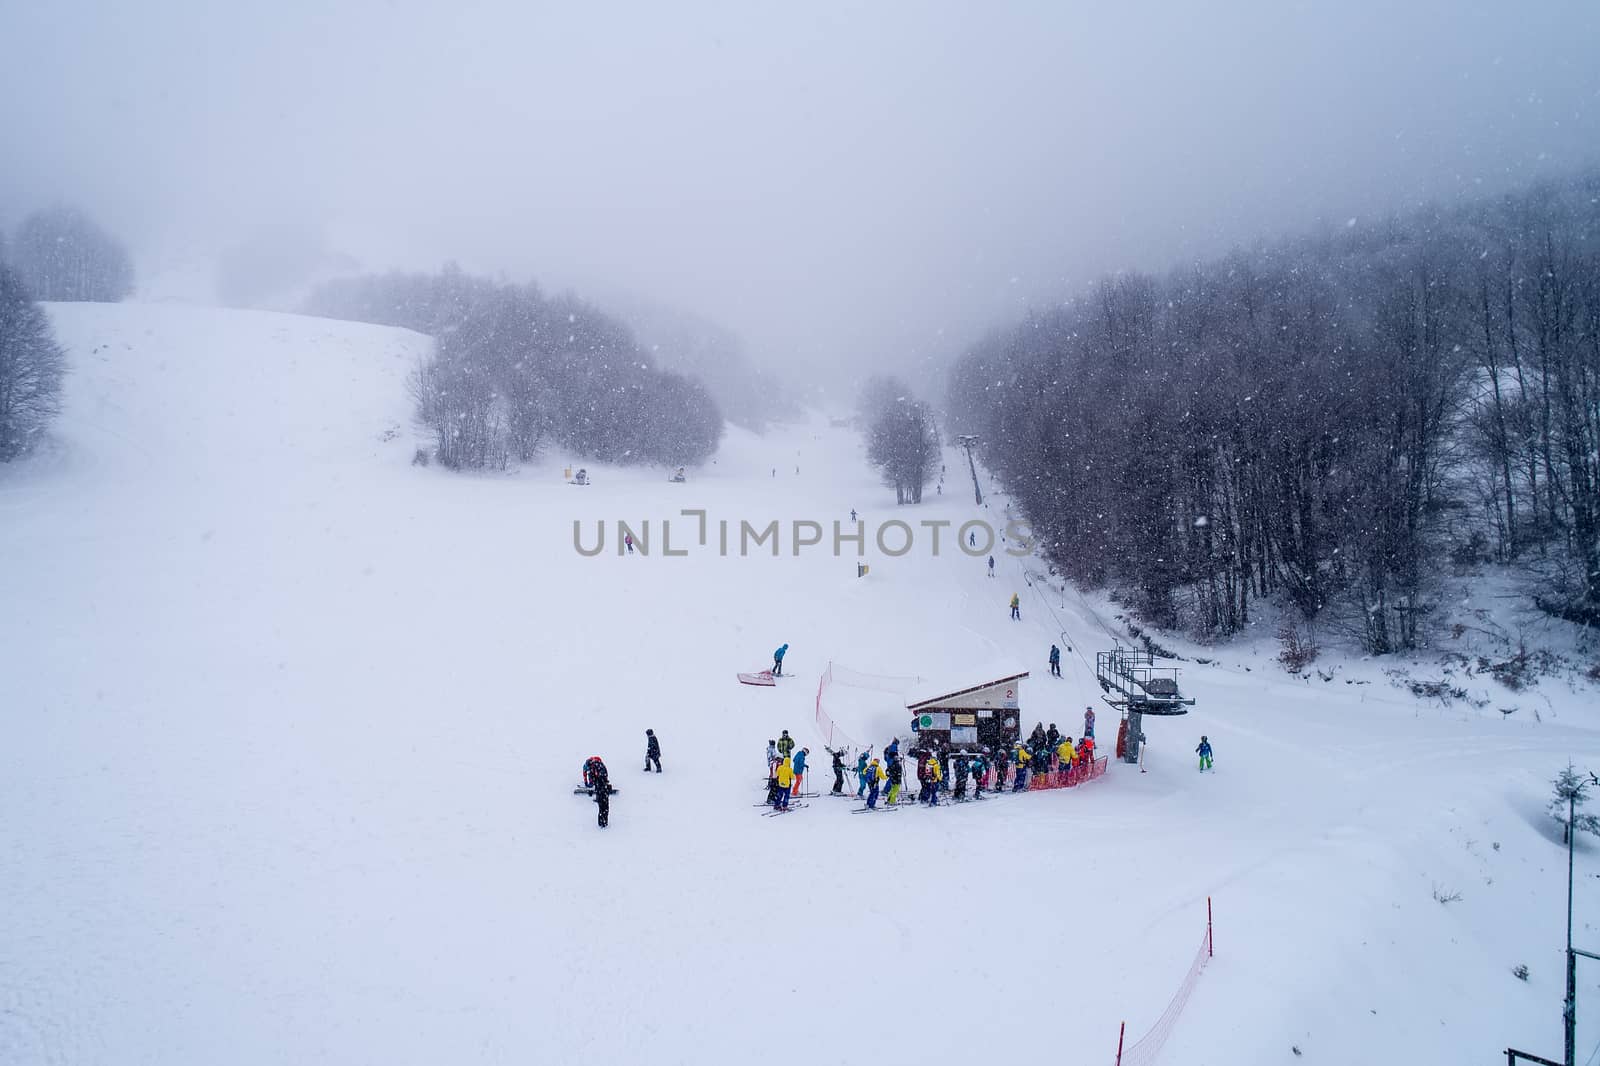 Naousa, Greece - January 13, 2018: Aerial View of skiers at Ski Resort 3-5 pigadia during the snowfall in the mountain Vermio.It is a modern ski resort with ski slopes with every degree of difficulty